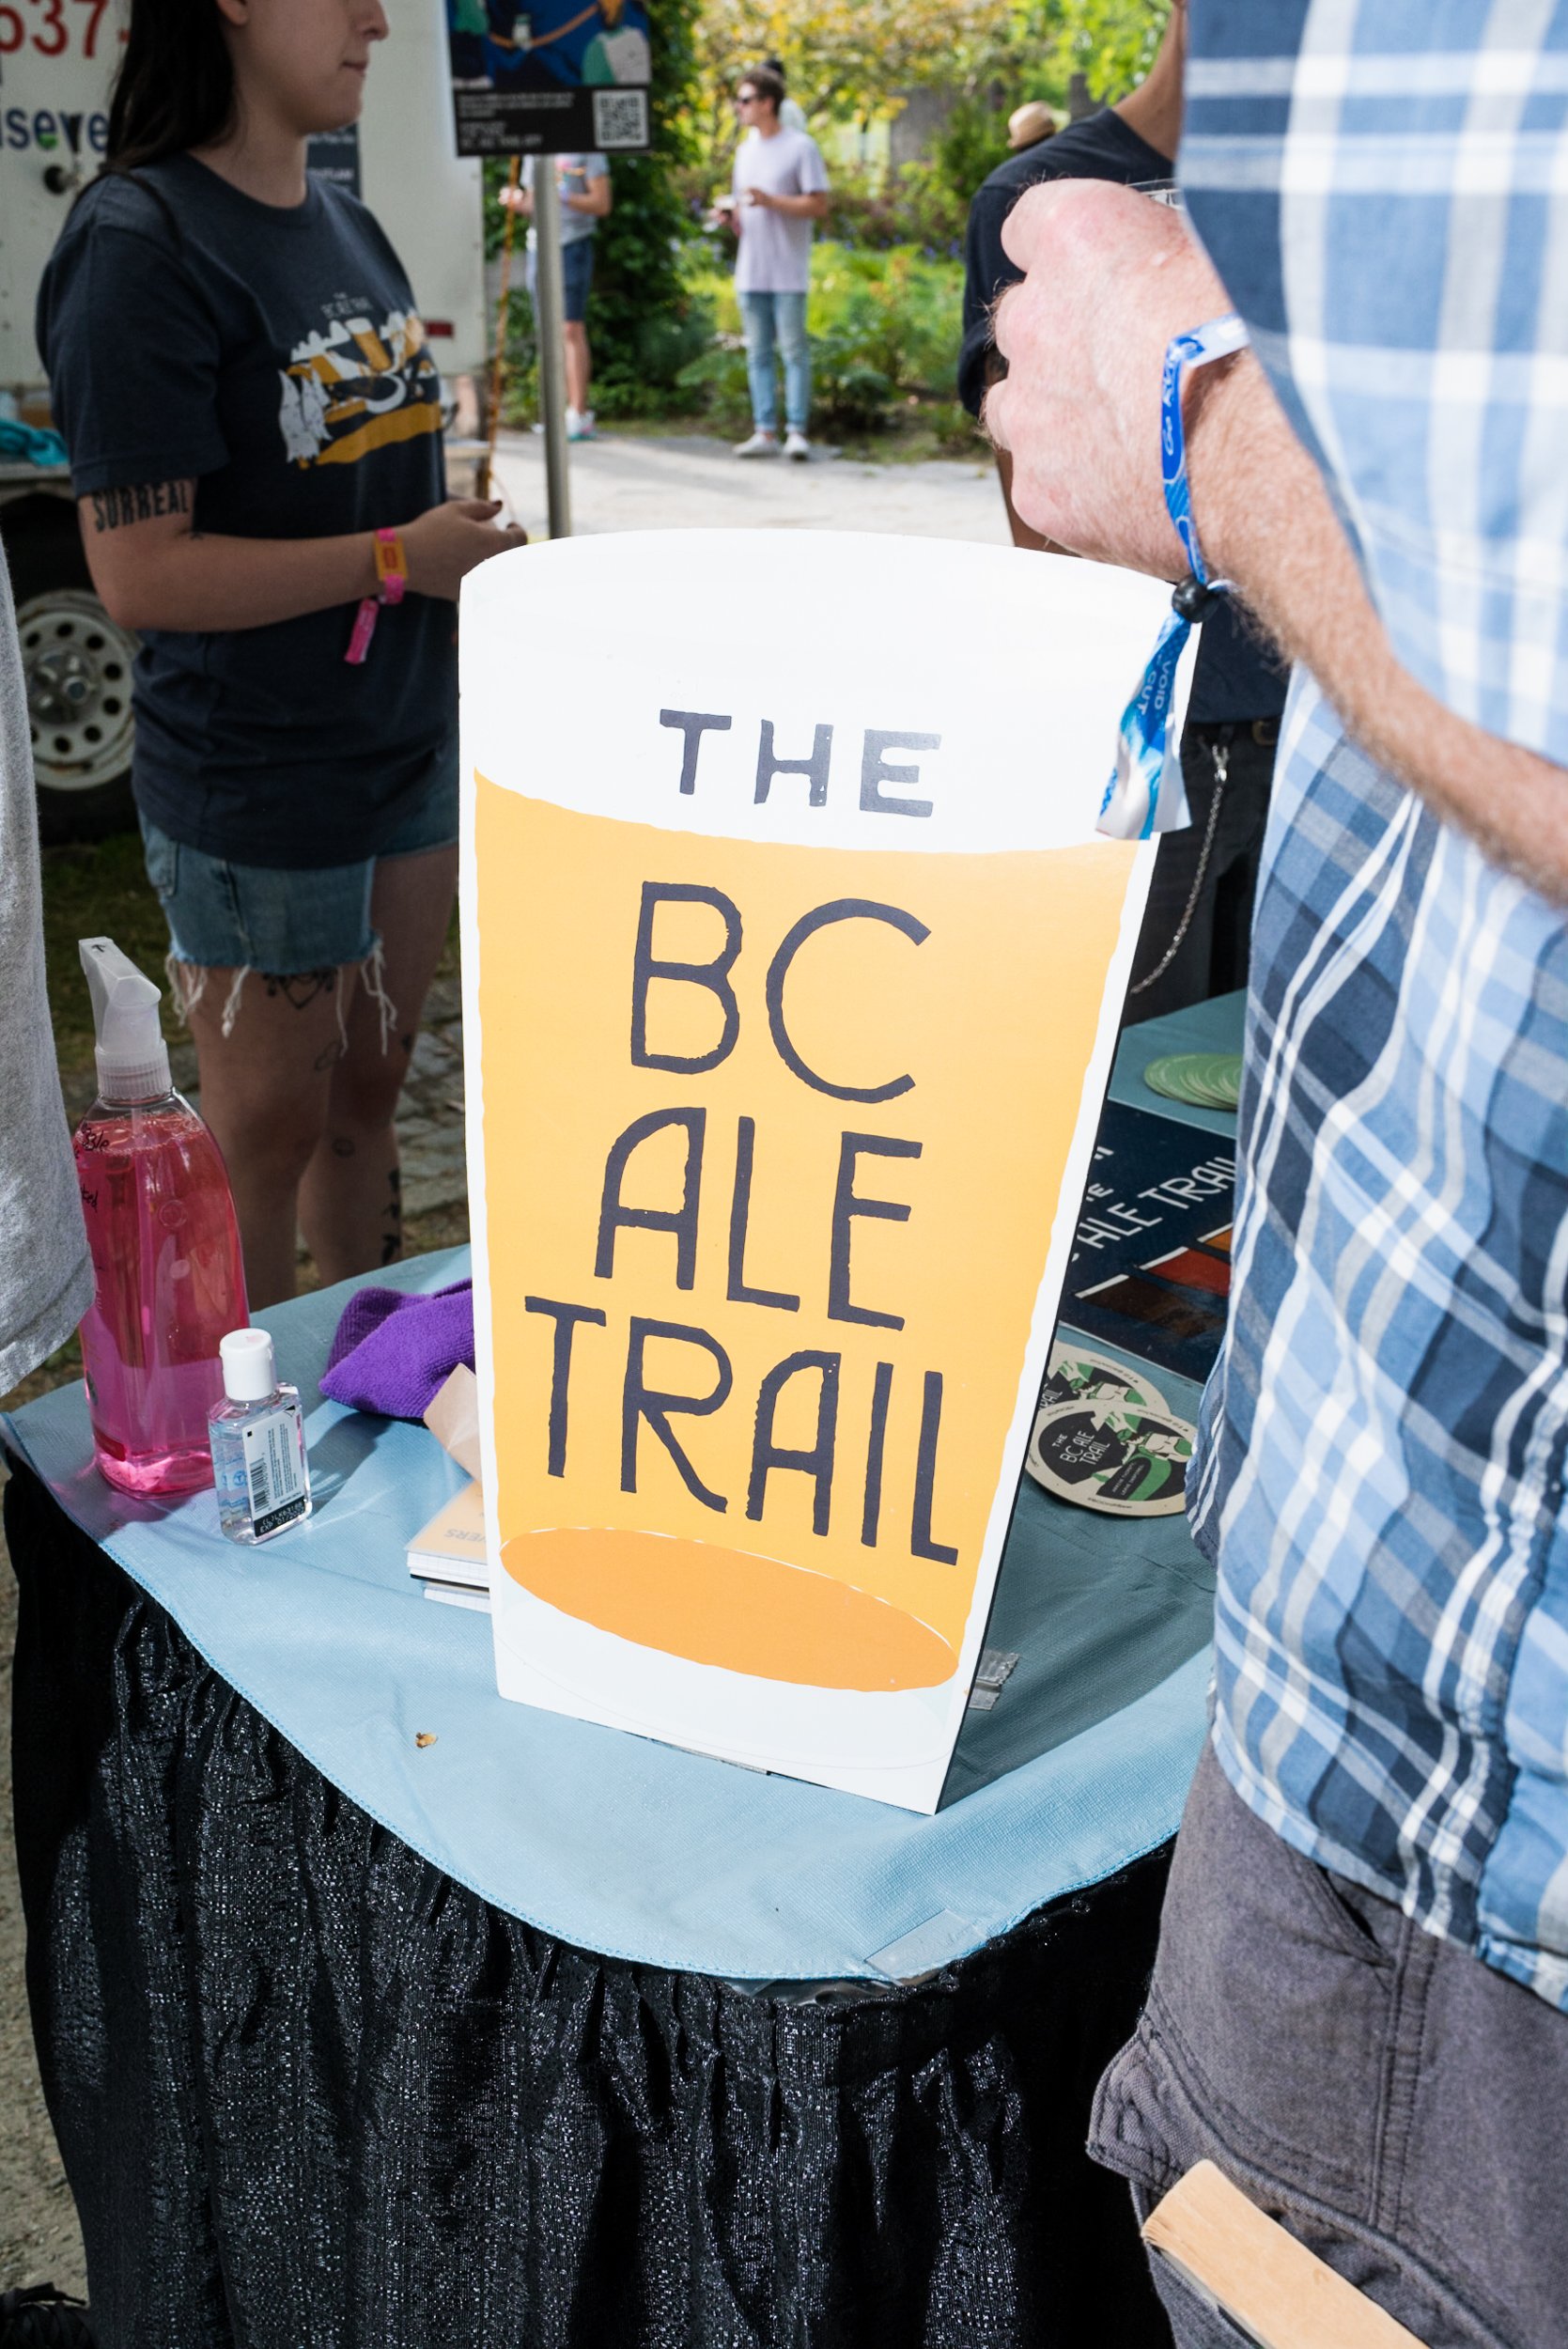 BC Ale Trail booth and display